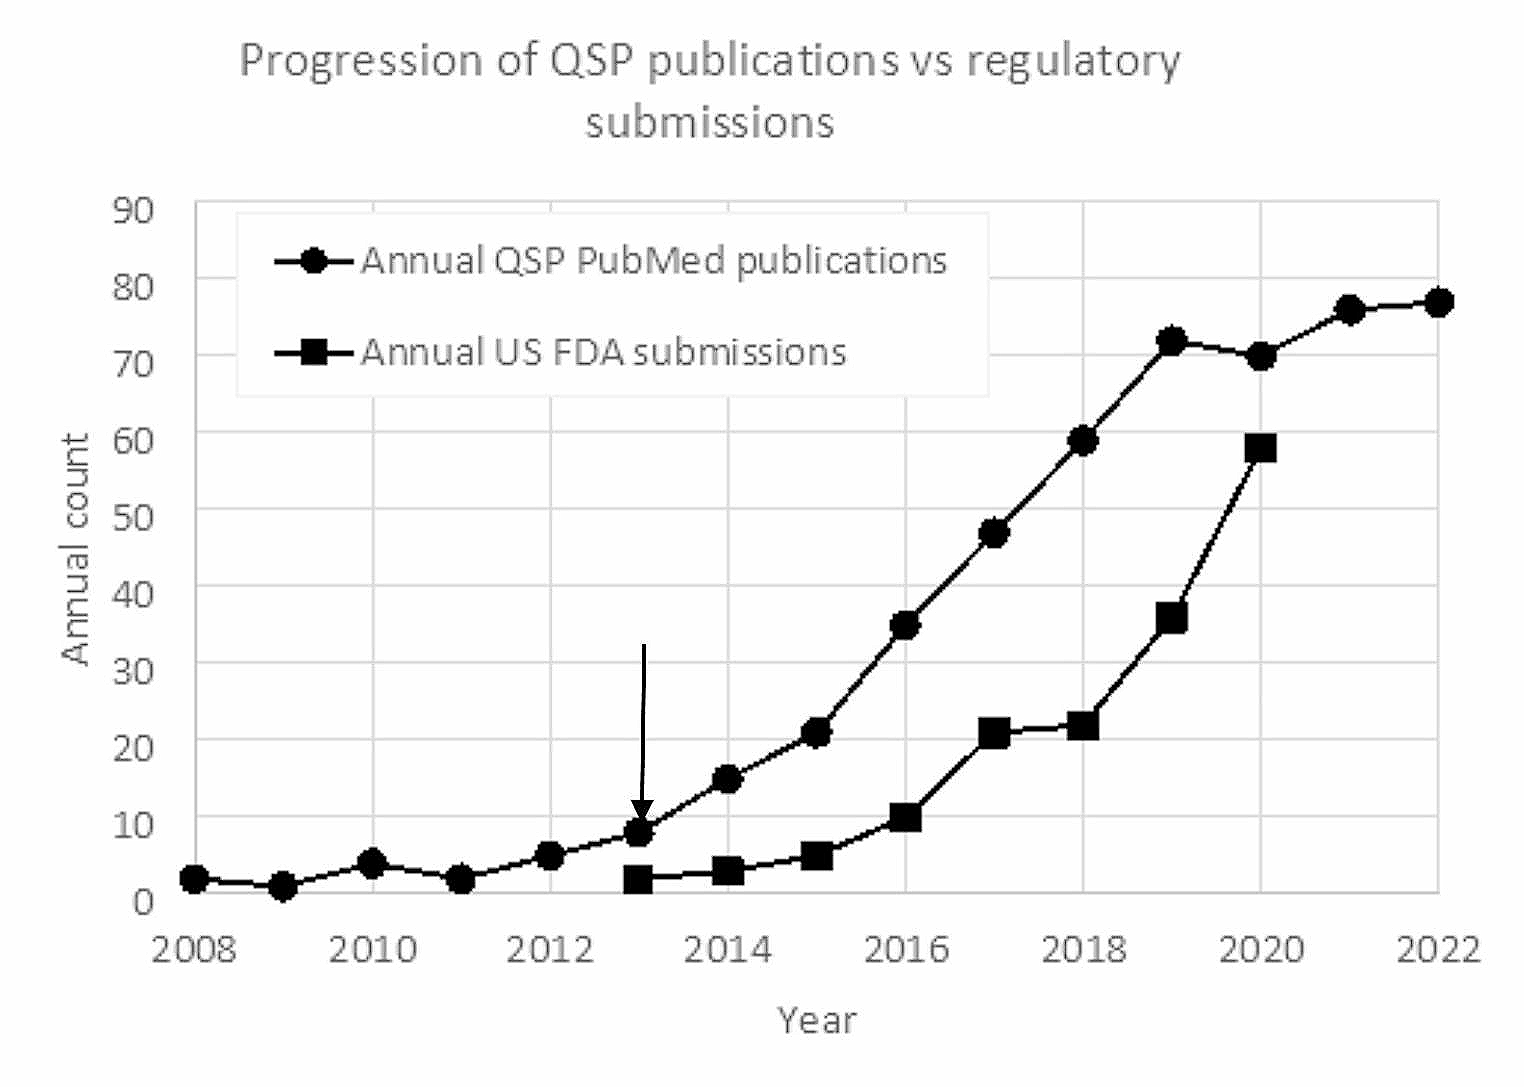 An industry perspective on current QSP trends in drug development